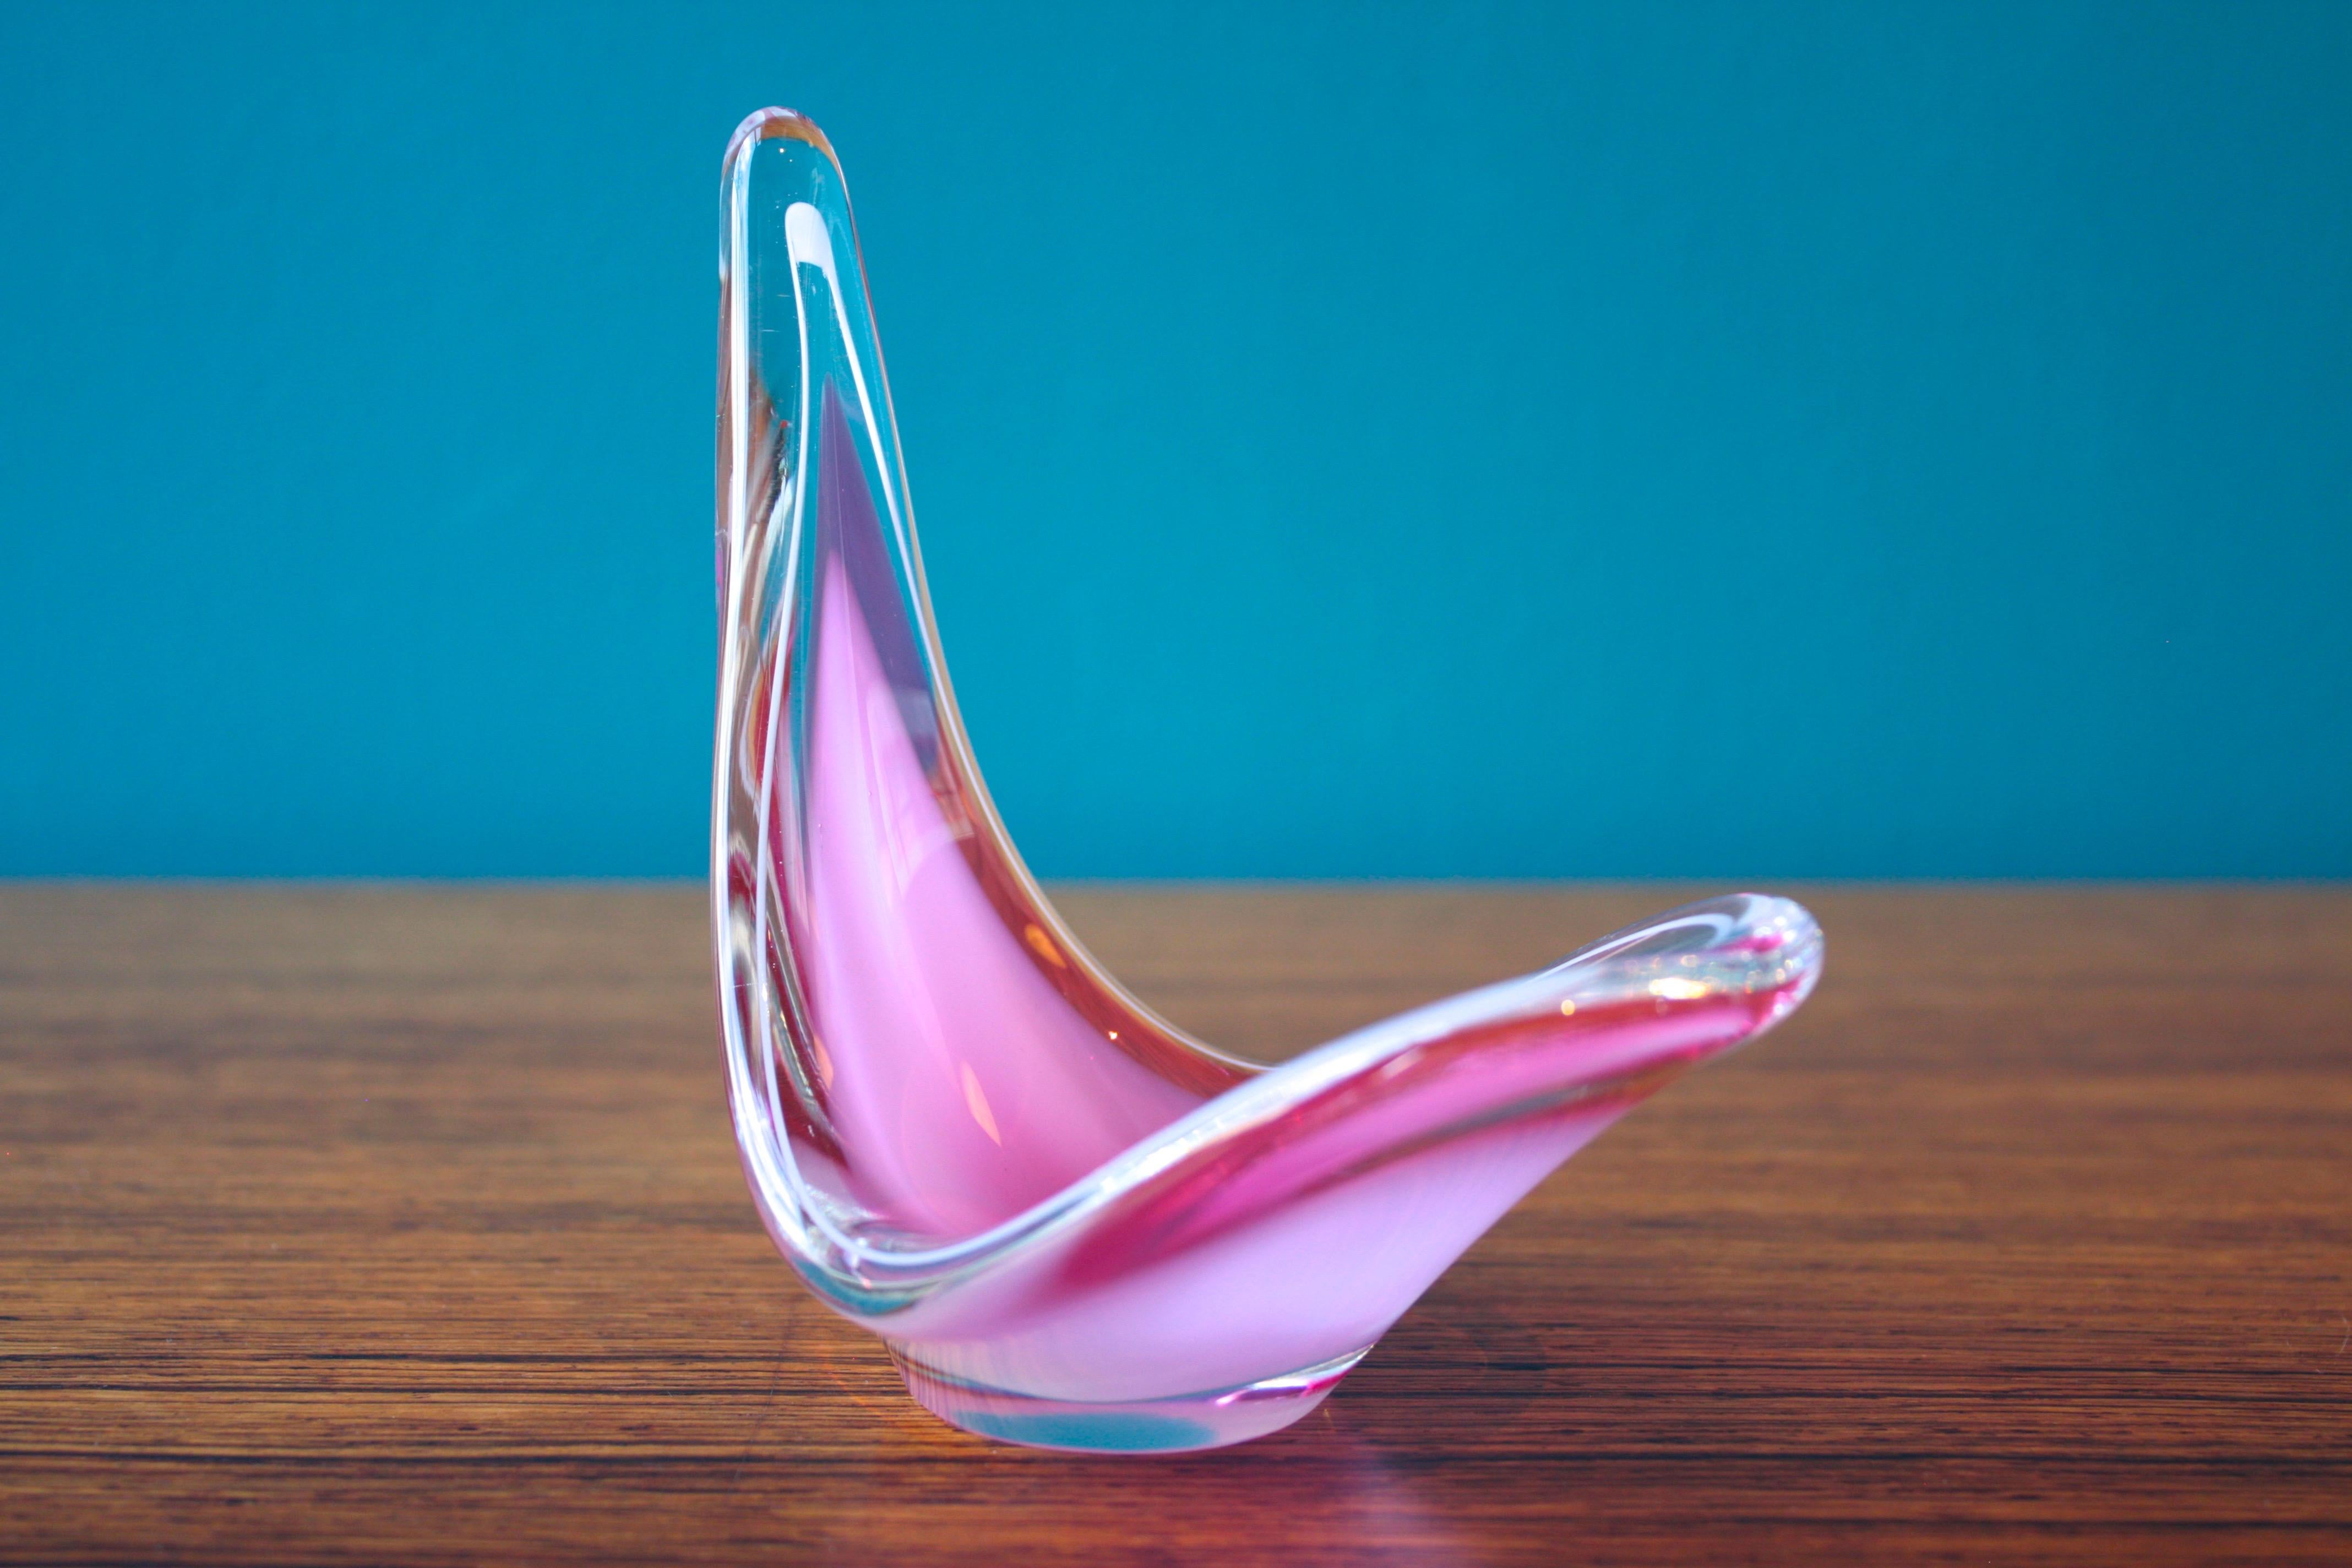 Flygsfors Coquille glass object, designed by Paul Kedelv, Sweden, 1958

Coquille glass object designed by Paul Kedelv and manufactured by Flygsfors Glassworks in Sweden in 1958. Marked on the base.
In 1949, Paul Kedelv joined Flygsfors and during